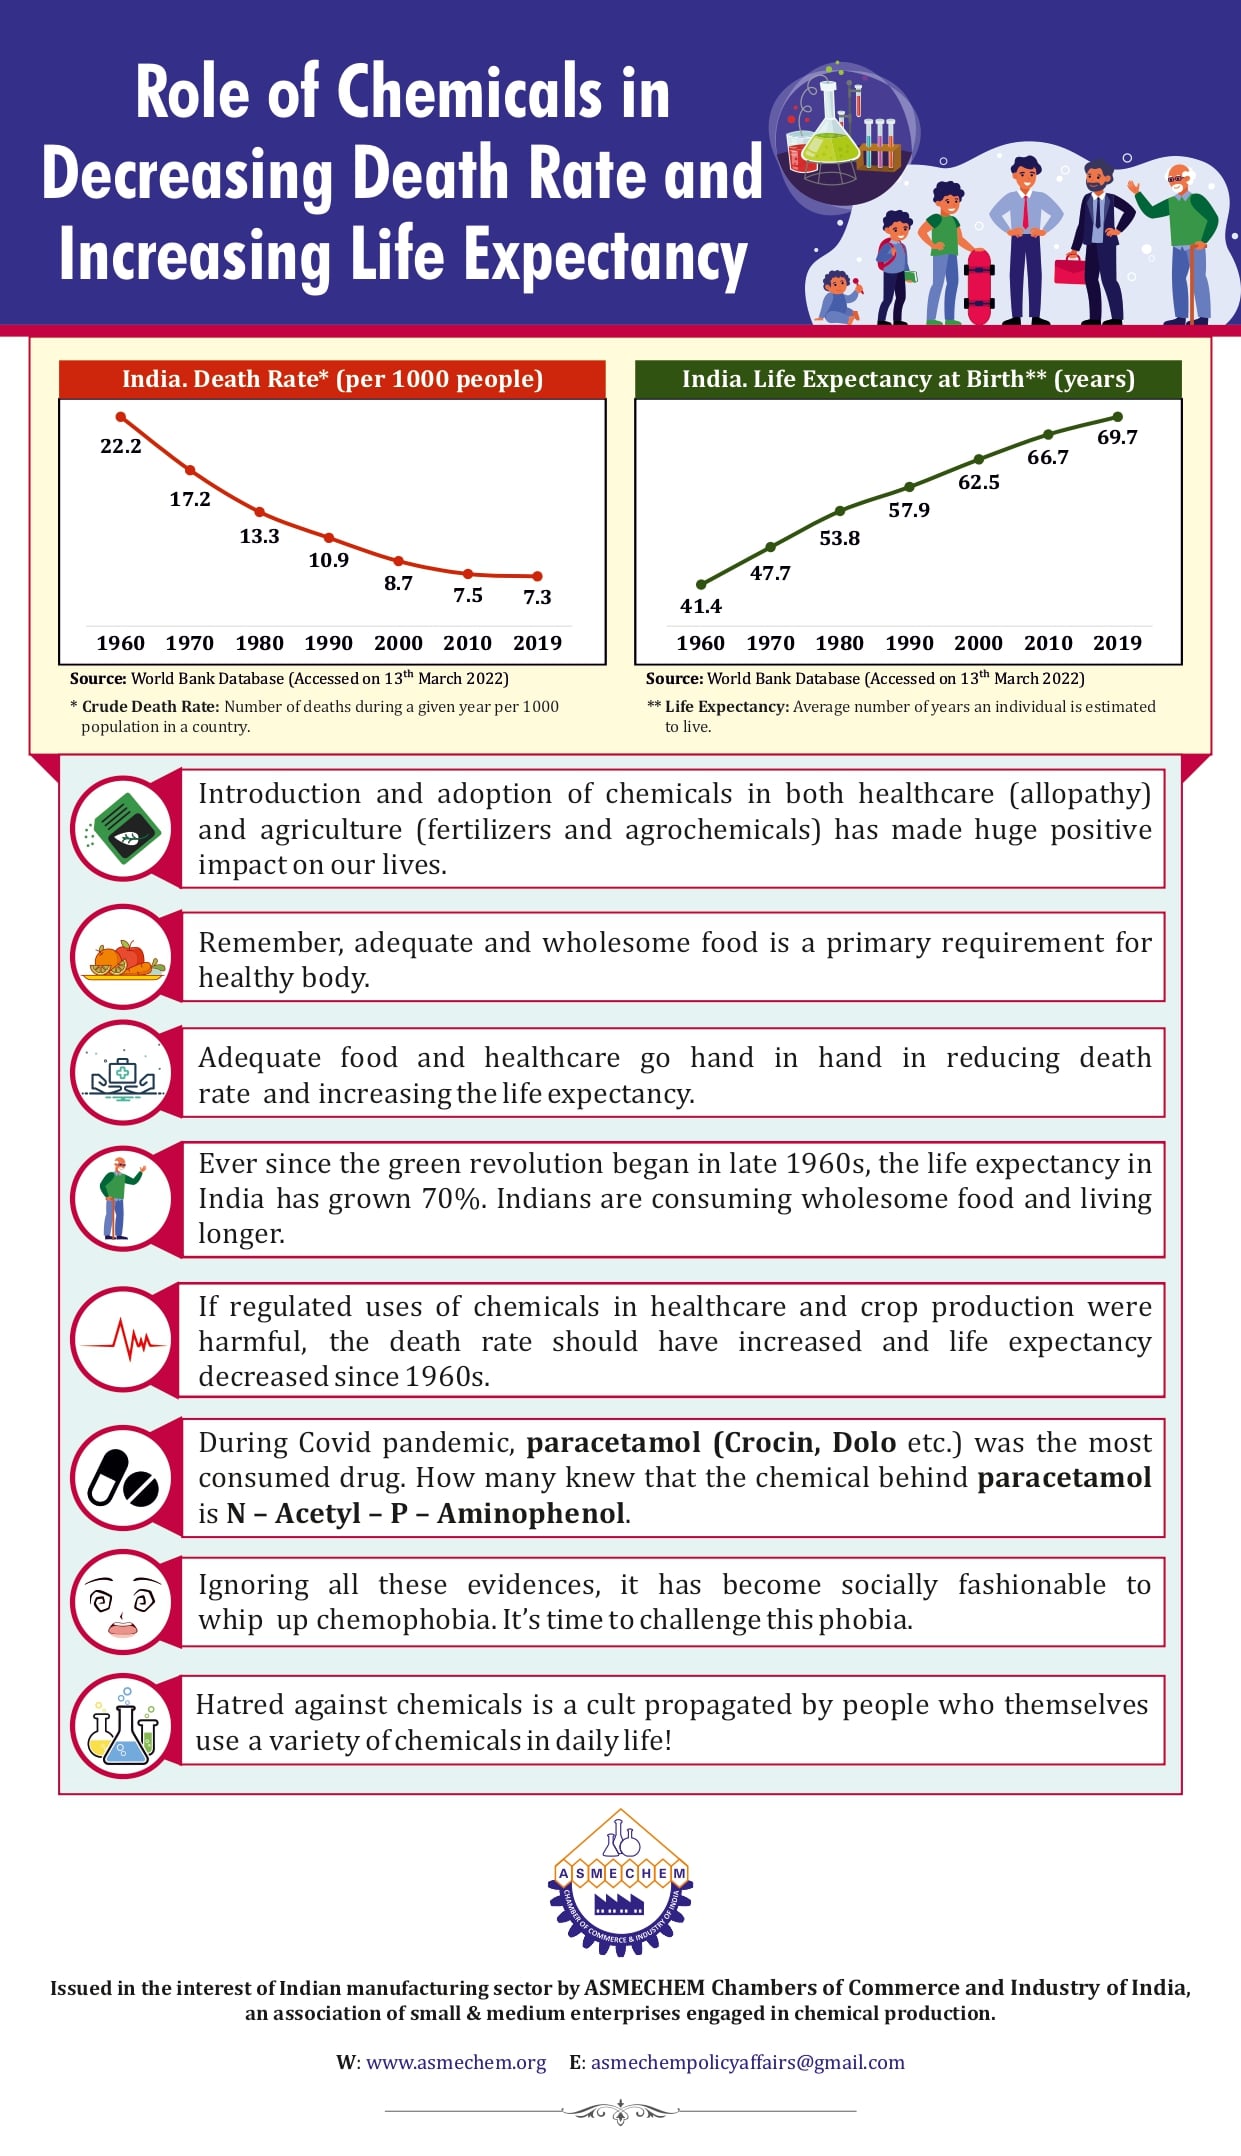 Role of Chemicals in Decreasing Death Rate and Increasing Life Expectancy Infographic